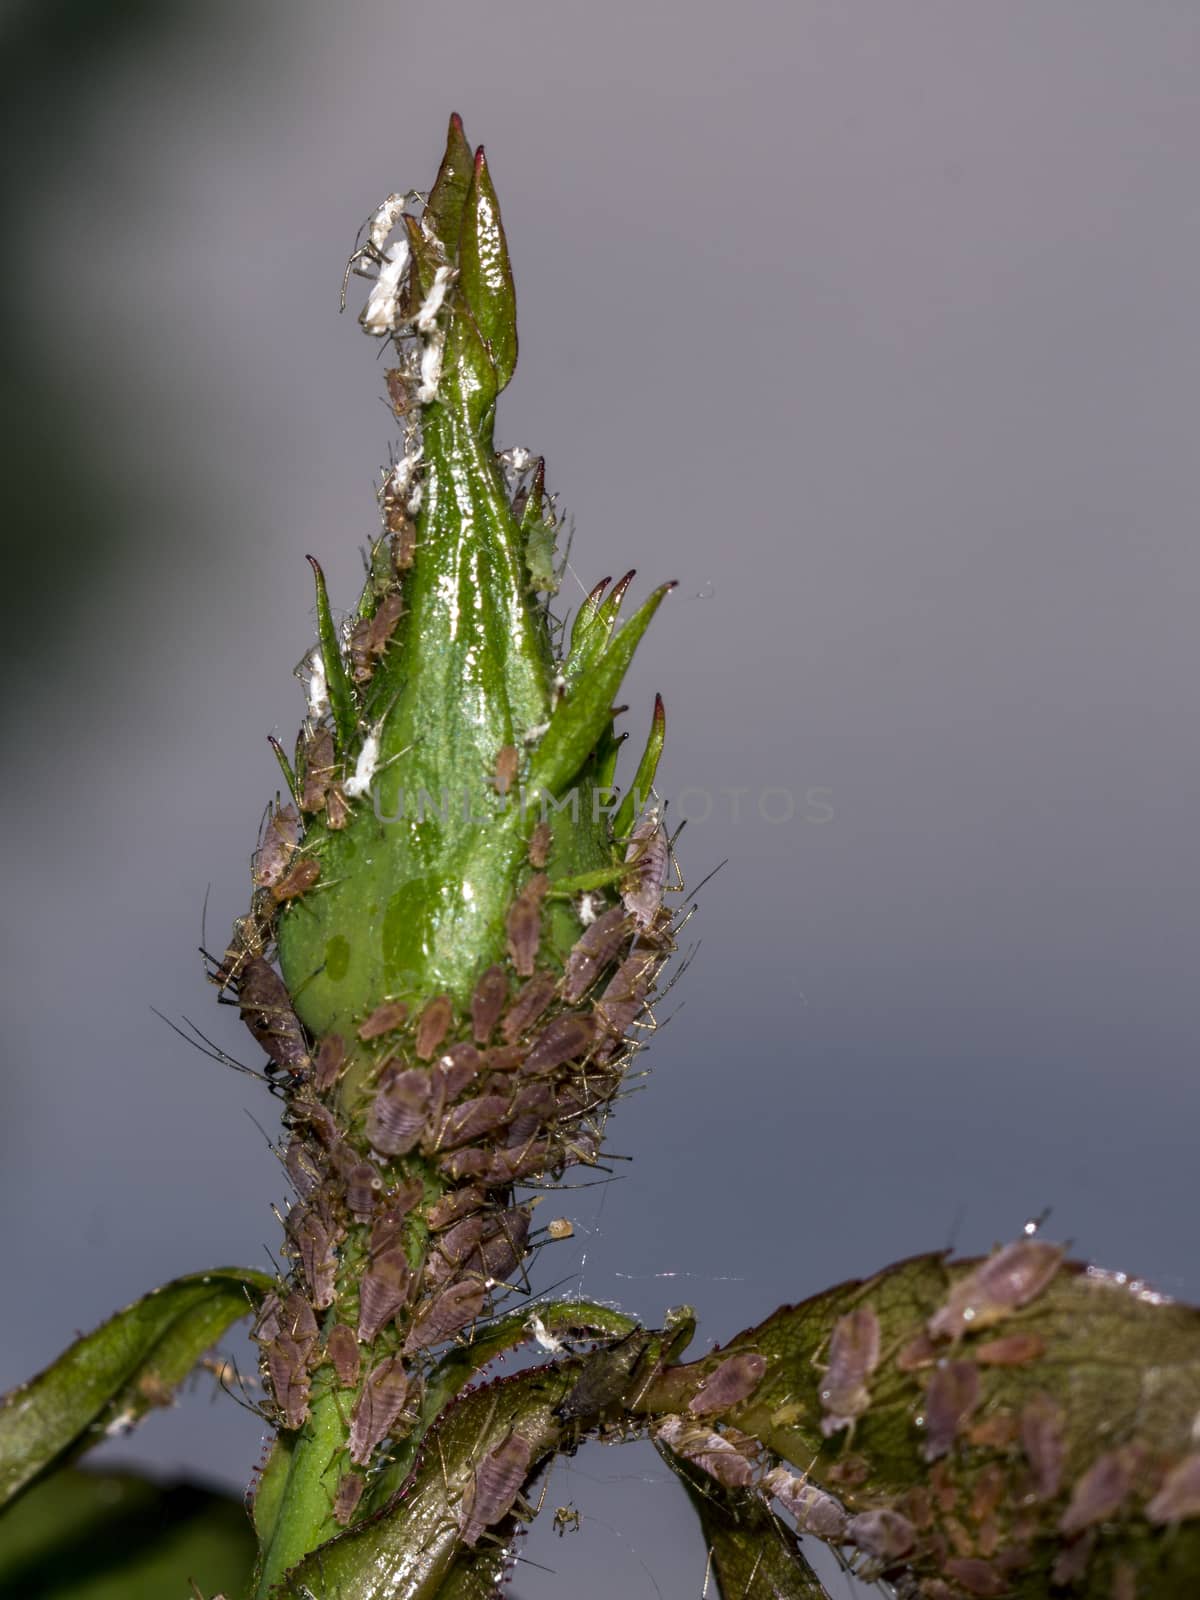 The Aphids  (Macrosiphum rosae) on roses in the garden.